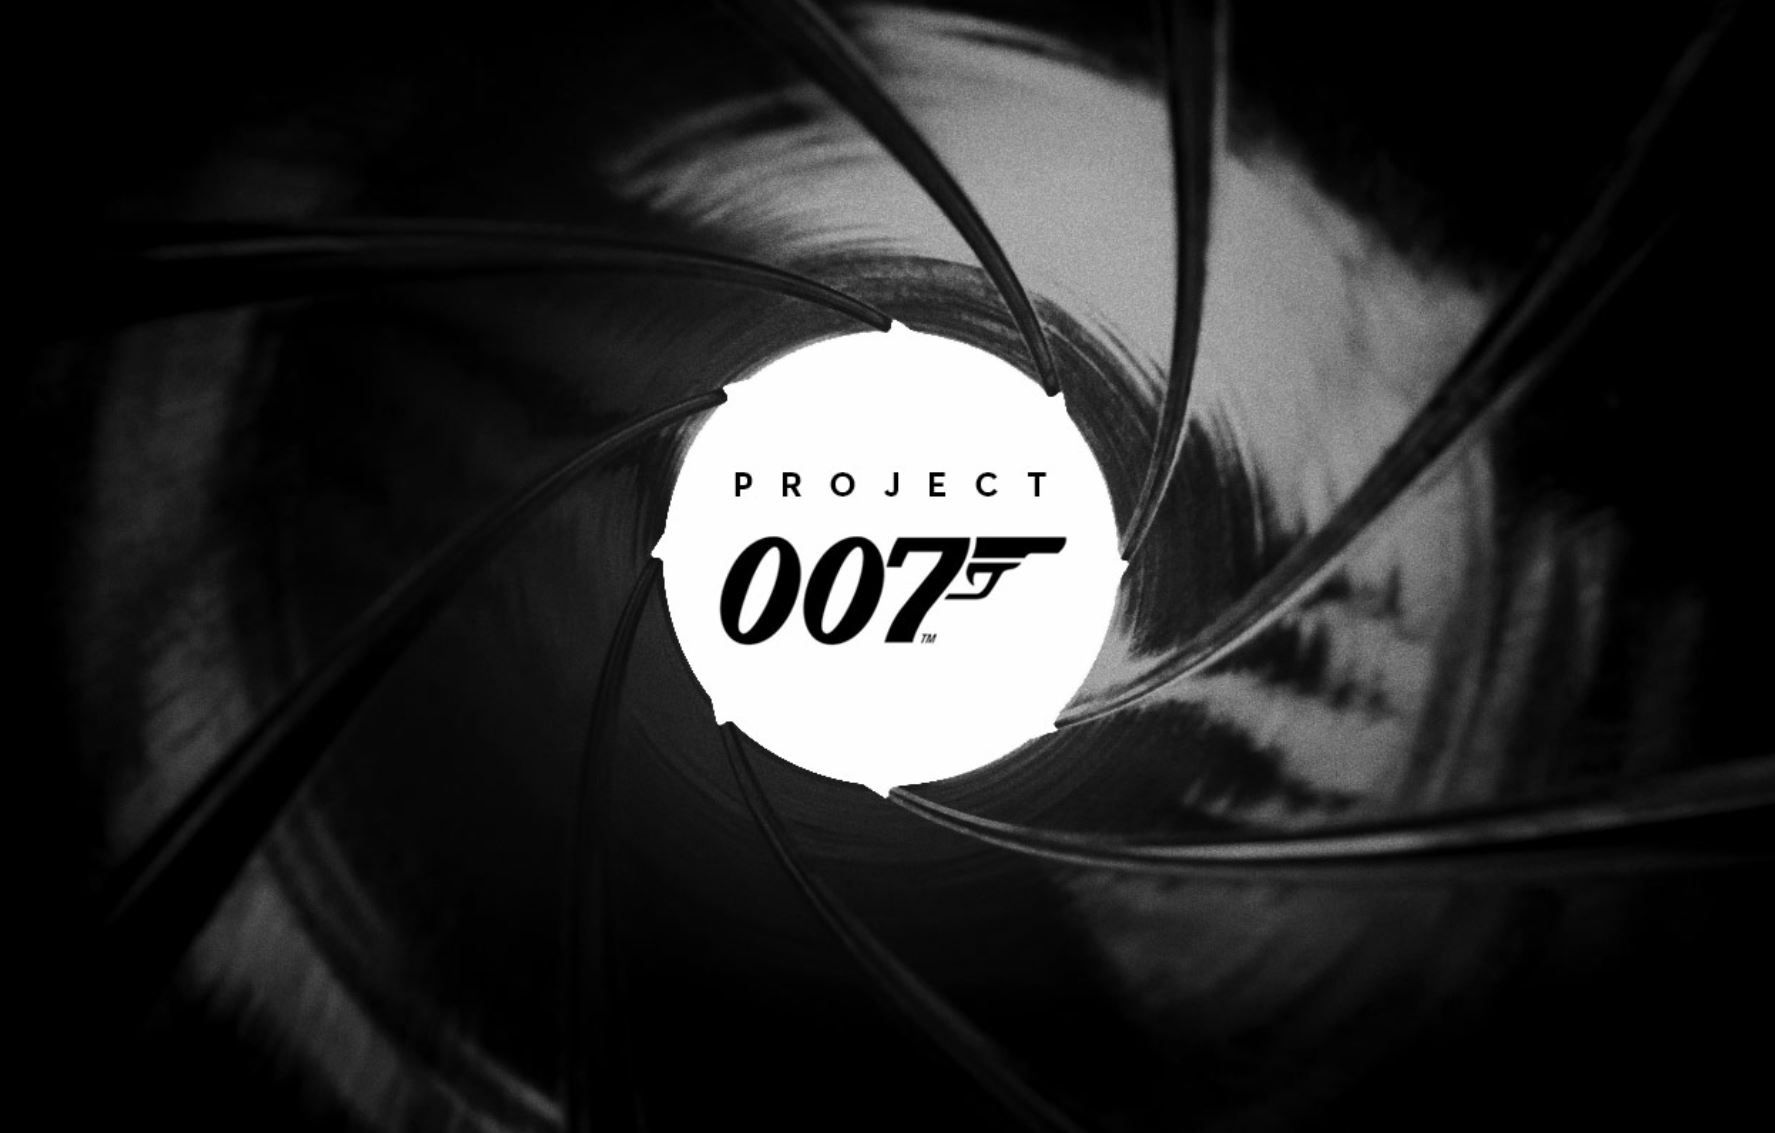 Project 007 Is New IP From IOI